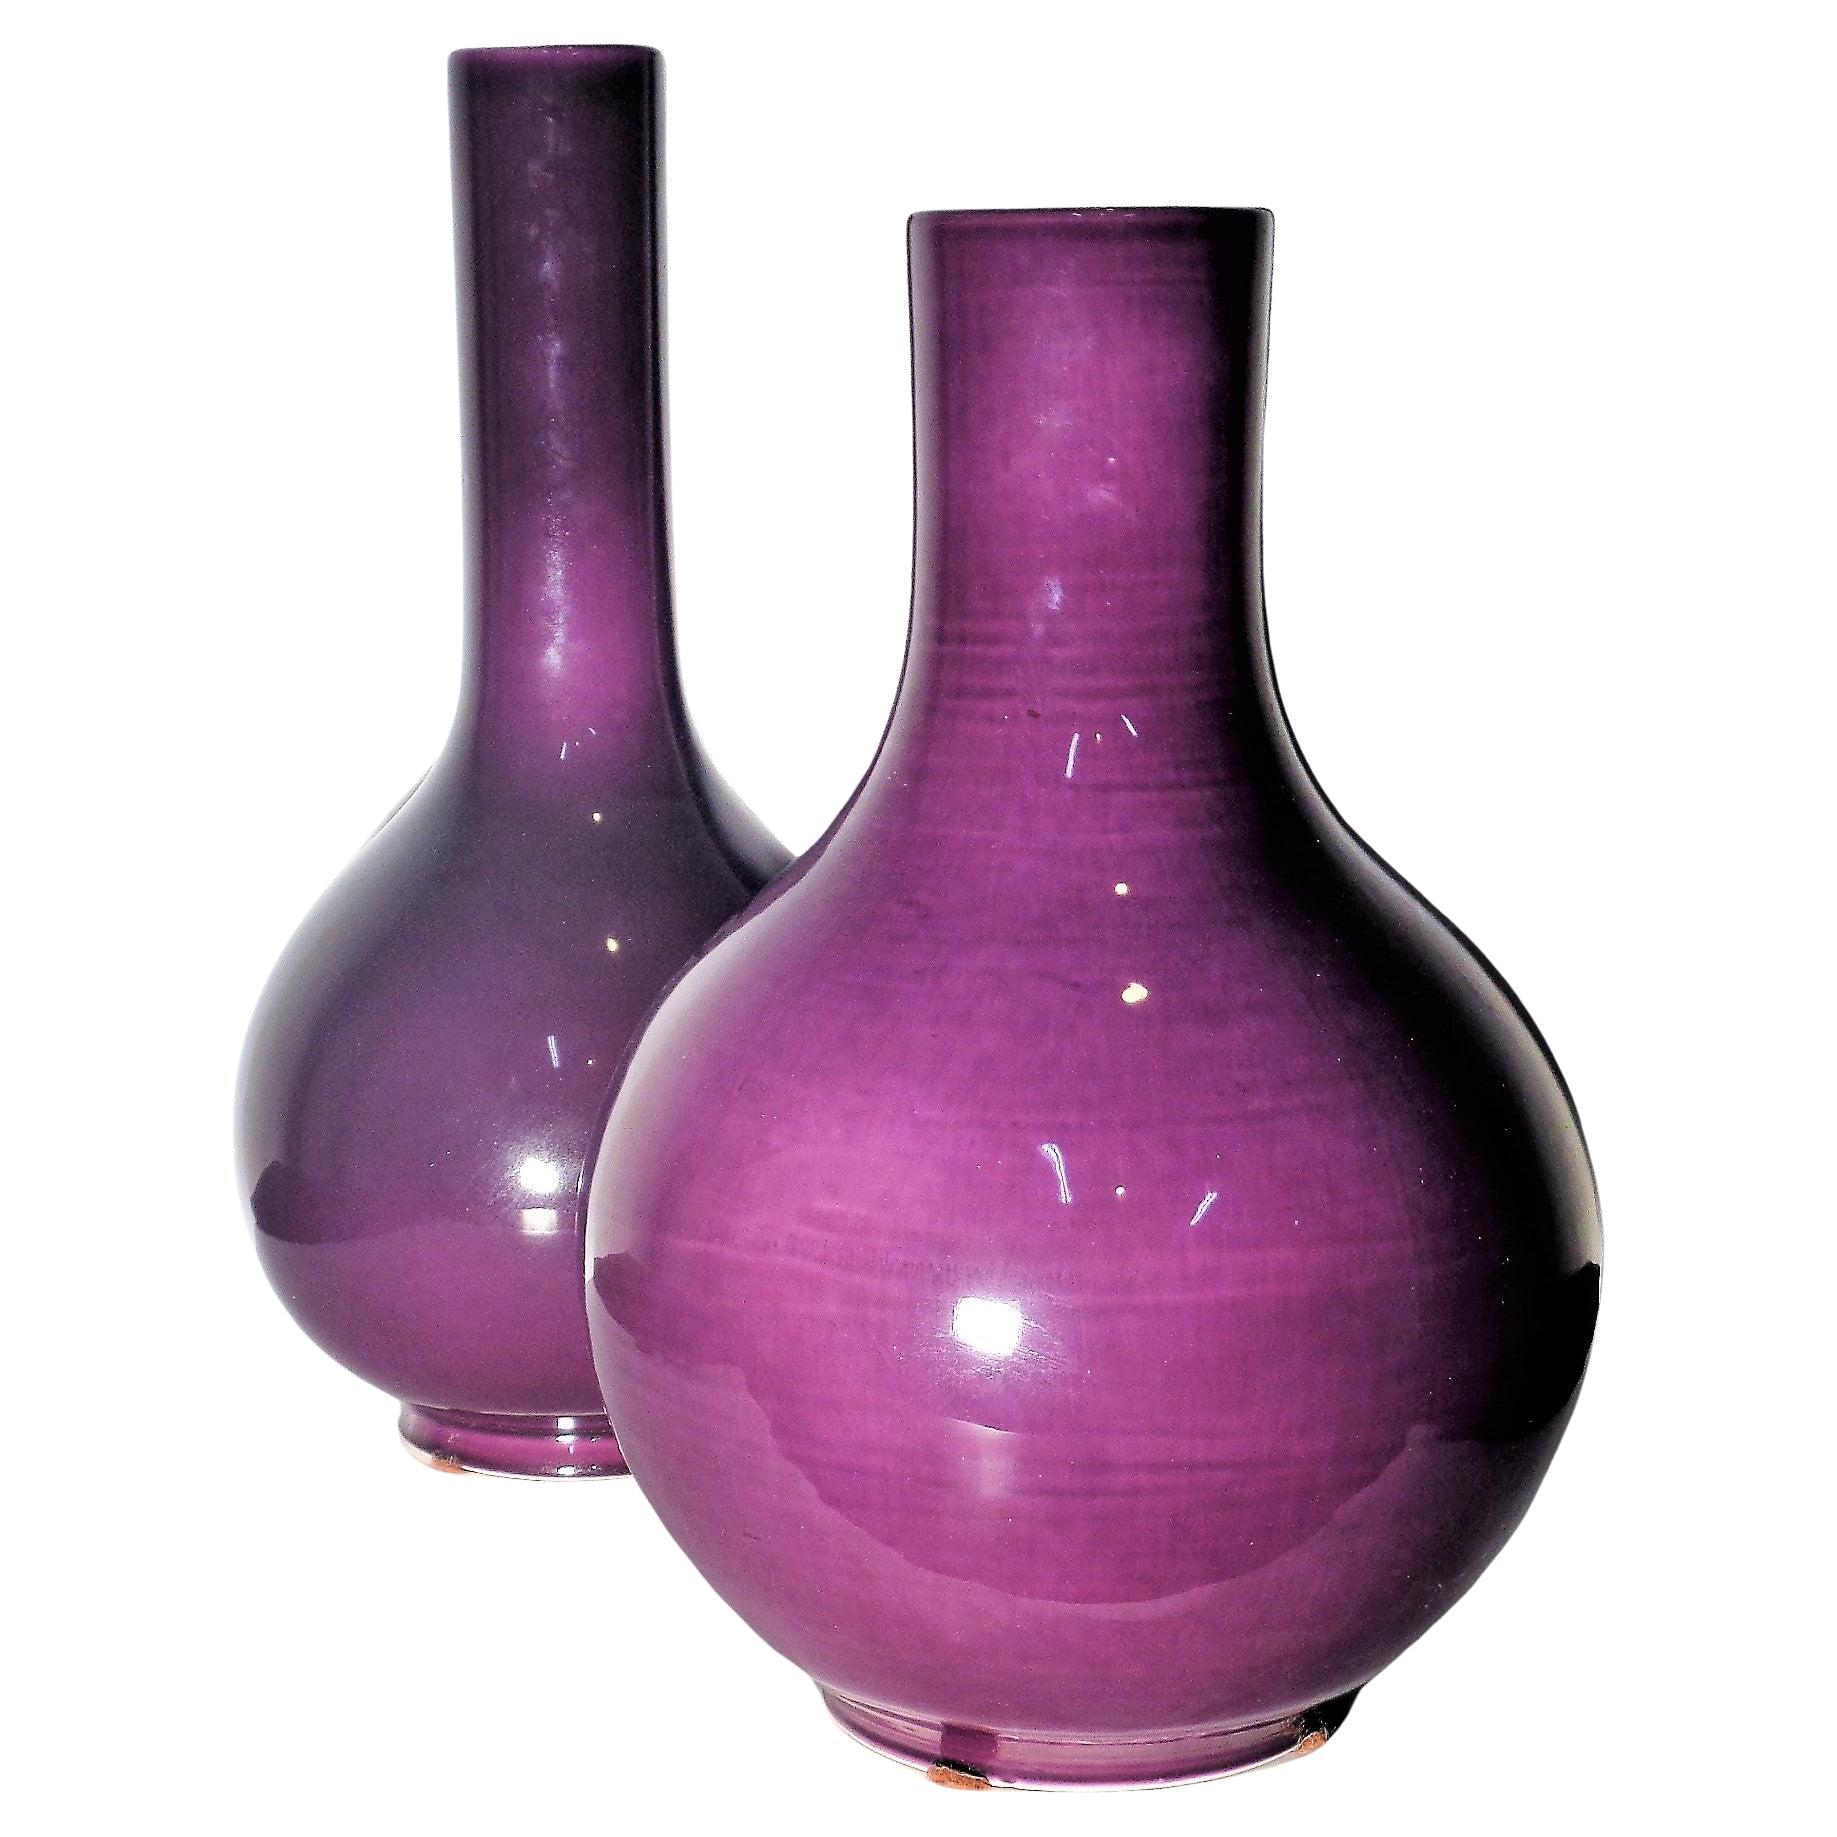 20th Century Large Ming Style Plum Purple Glazed Porcelain Vases, Made in Italy